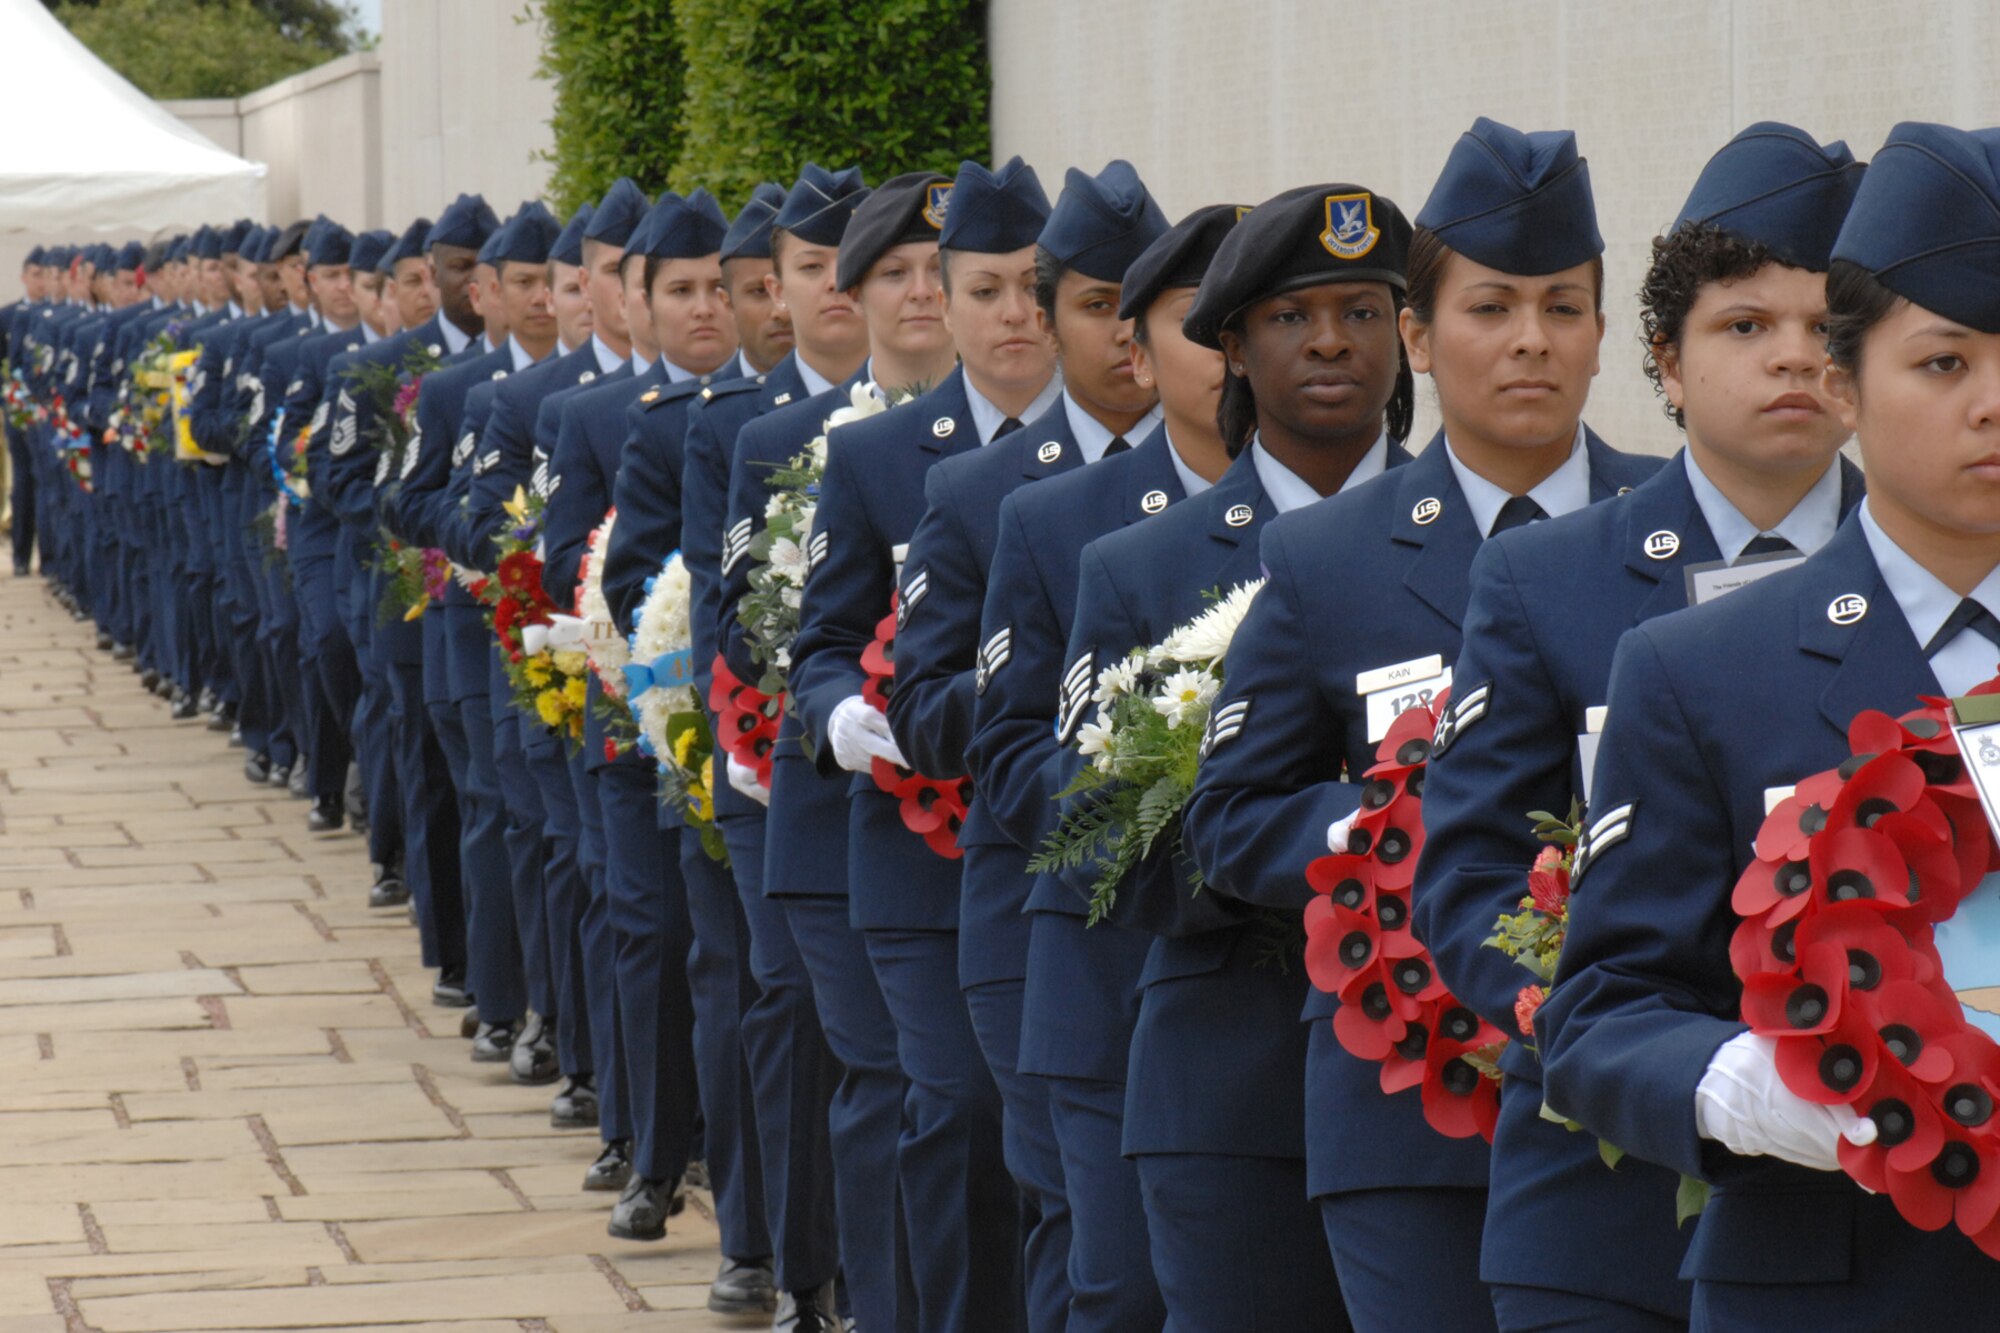 RAF MLDENHALL, England – Dozens of Airmen carry wreaths donated from various organizations to lay at the Wall of the Lost as part of the Memorial Day event at Madingley Memorial Cemetery, May 25, 2009.  The event is held annually and includes full military honors.  (U.S. Air Force file photo)